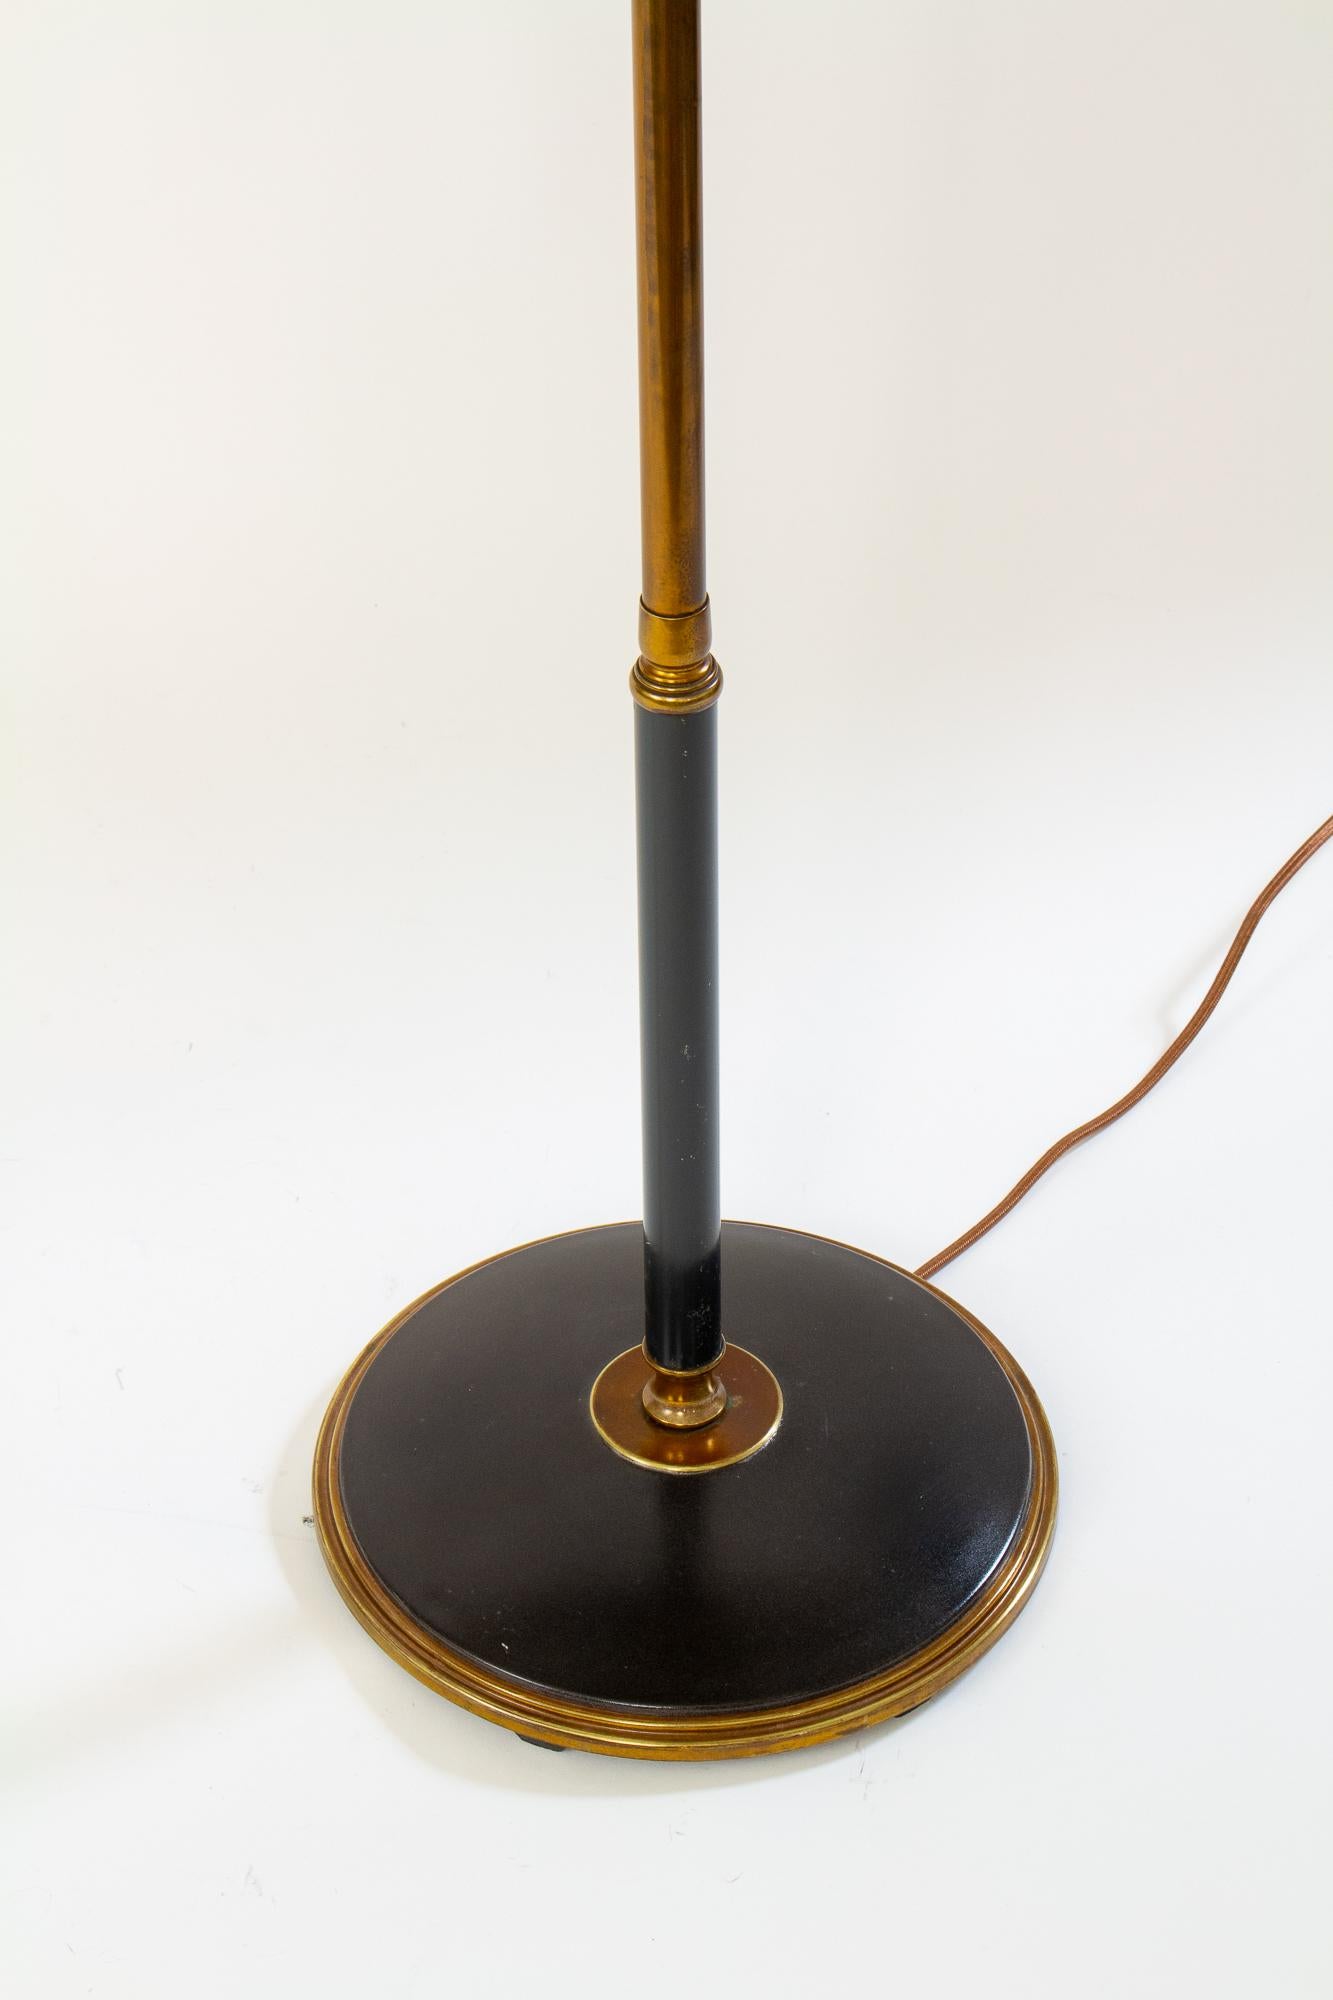 A telescoping floor lamp from the 1940’s with the original black and gold tole finish.  This lamp telescopes from 44” to 59” tall and has a swivel arm to allow perfect placement by your favorite reading chair. A diffuser top and shade prevents